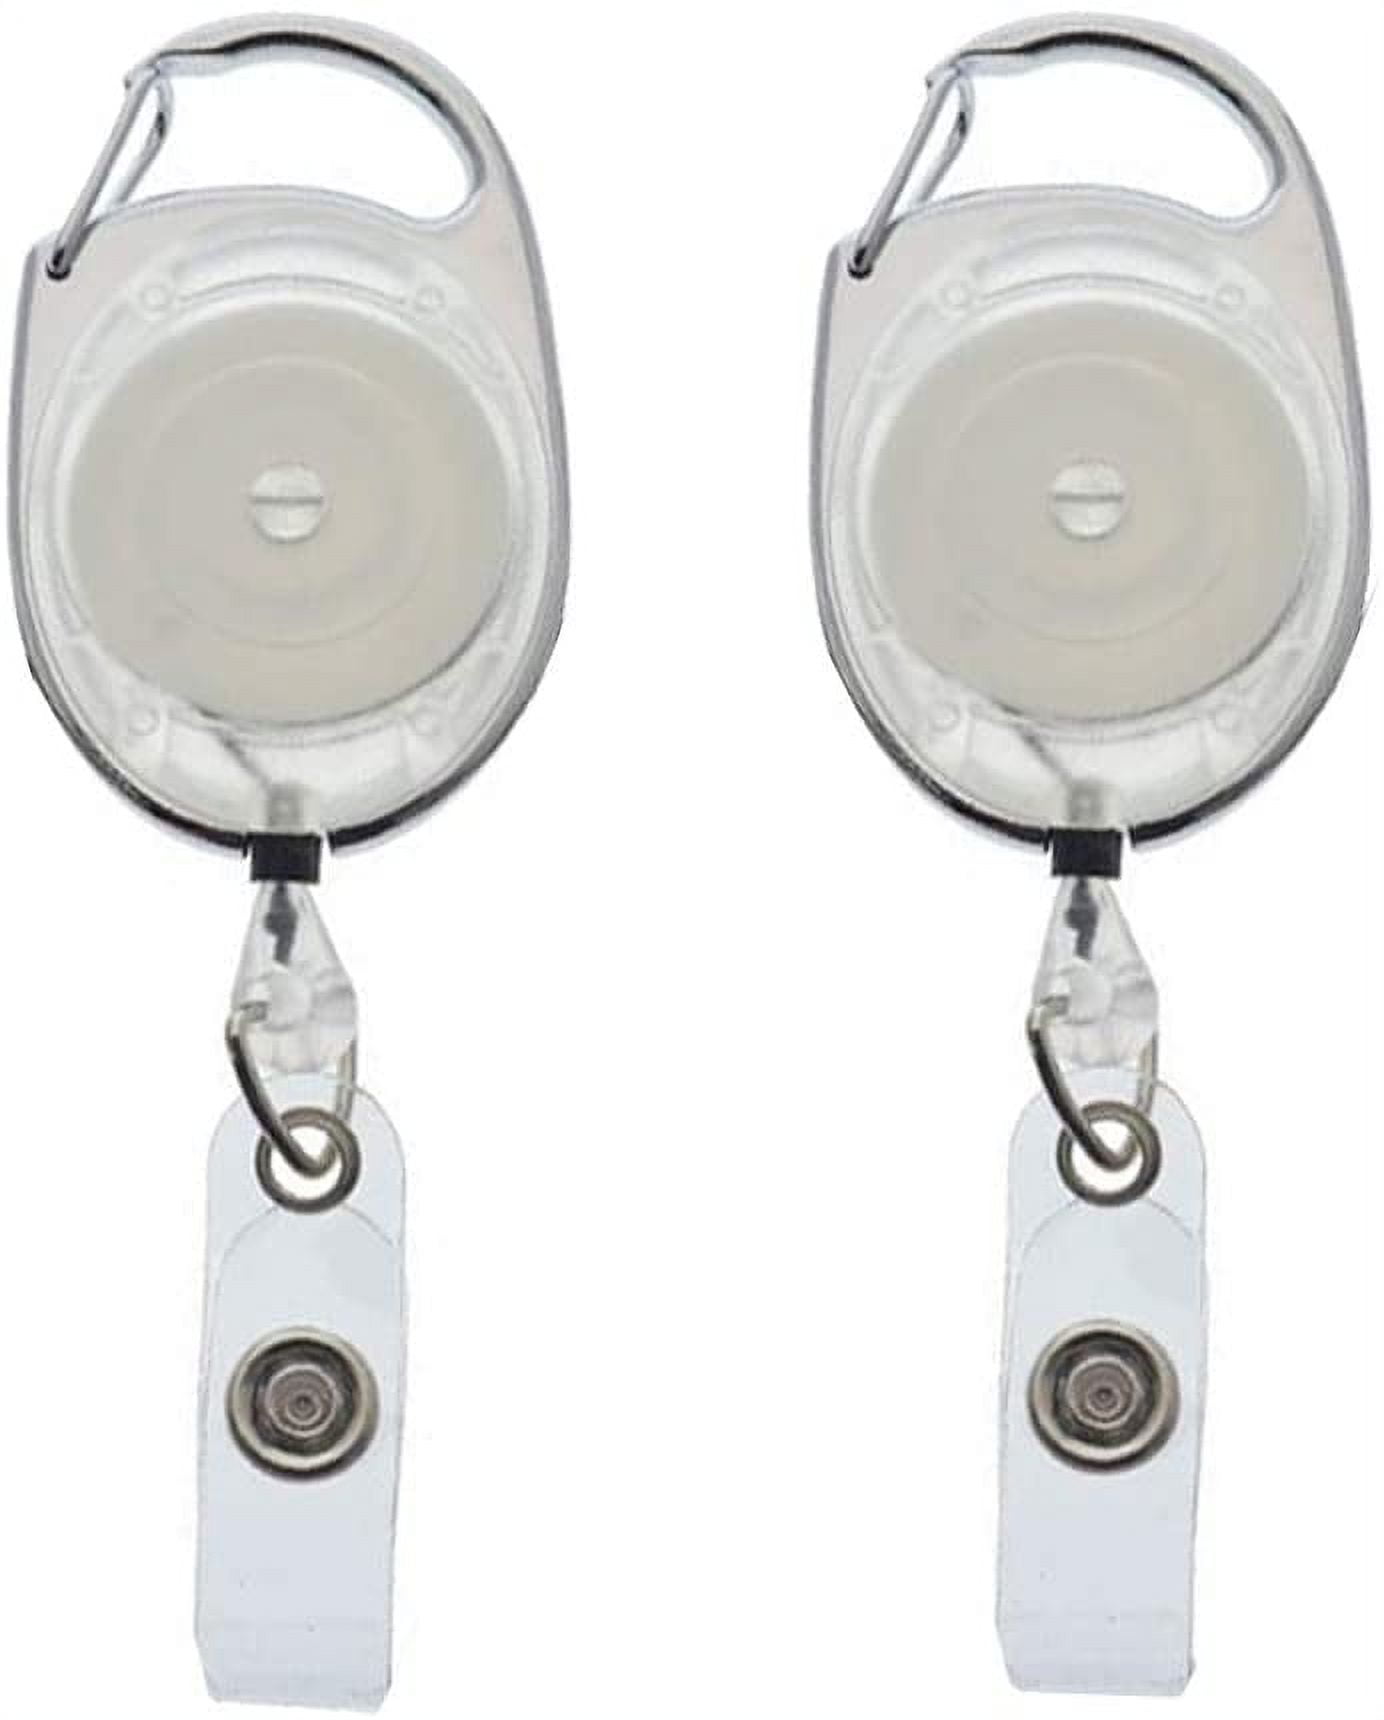 5 Pc - Badge Reels w Belt Clip & Top Loop Lanyard Attachment - Large 1  Surface